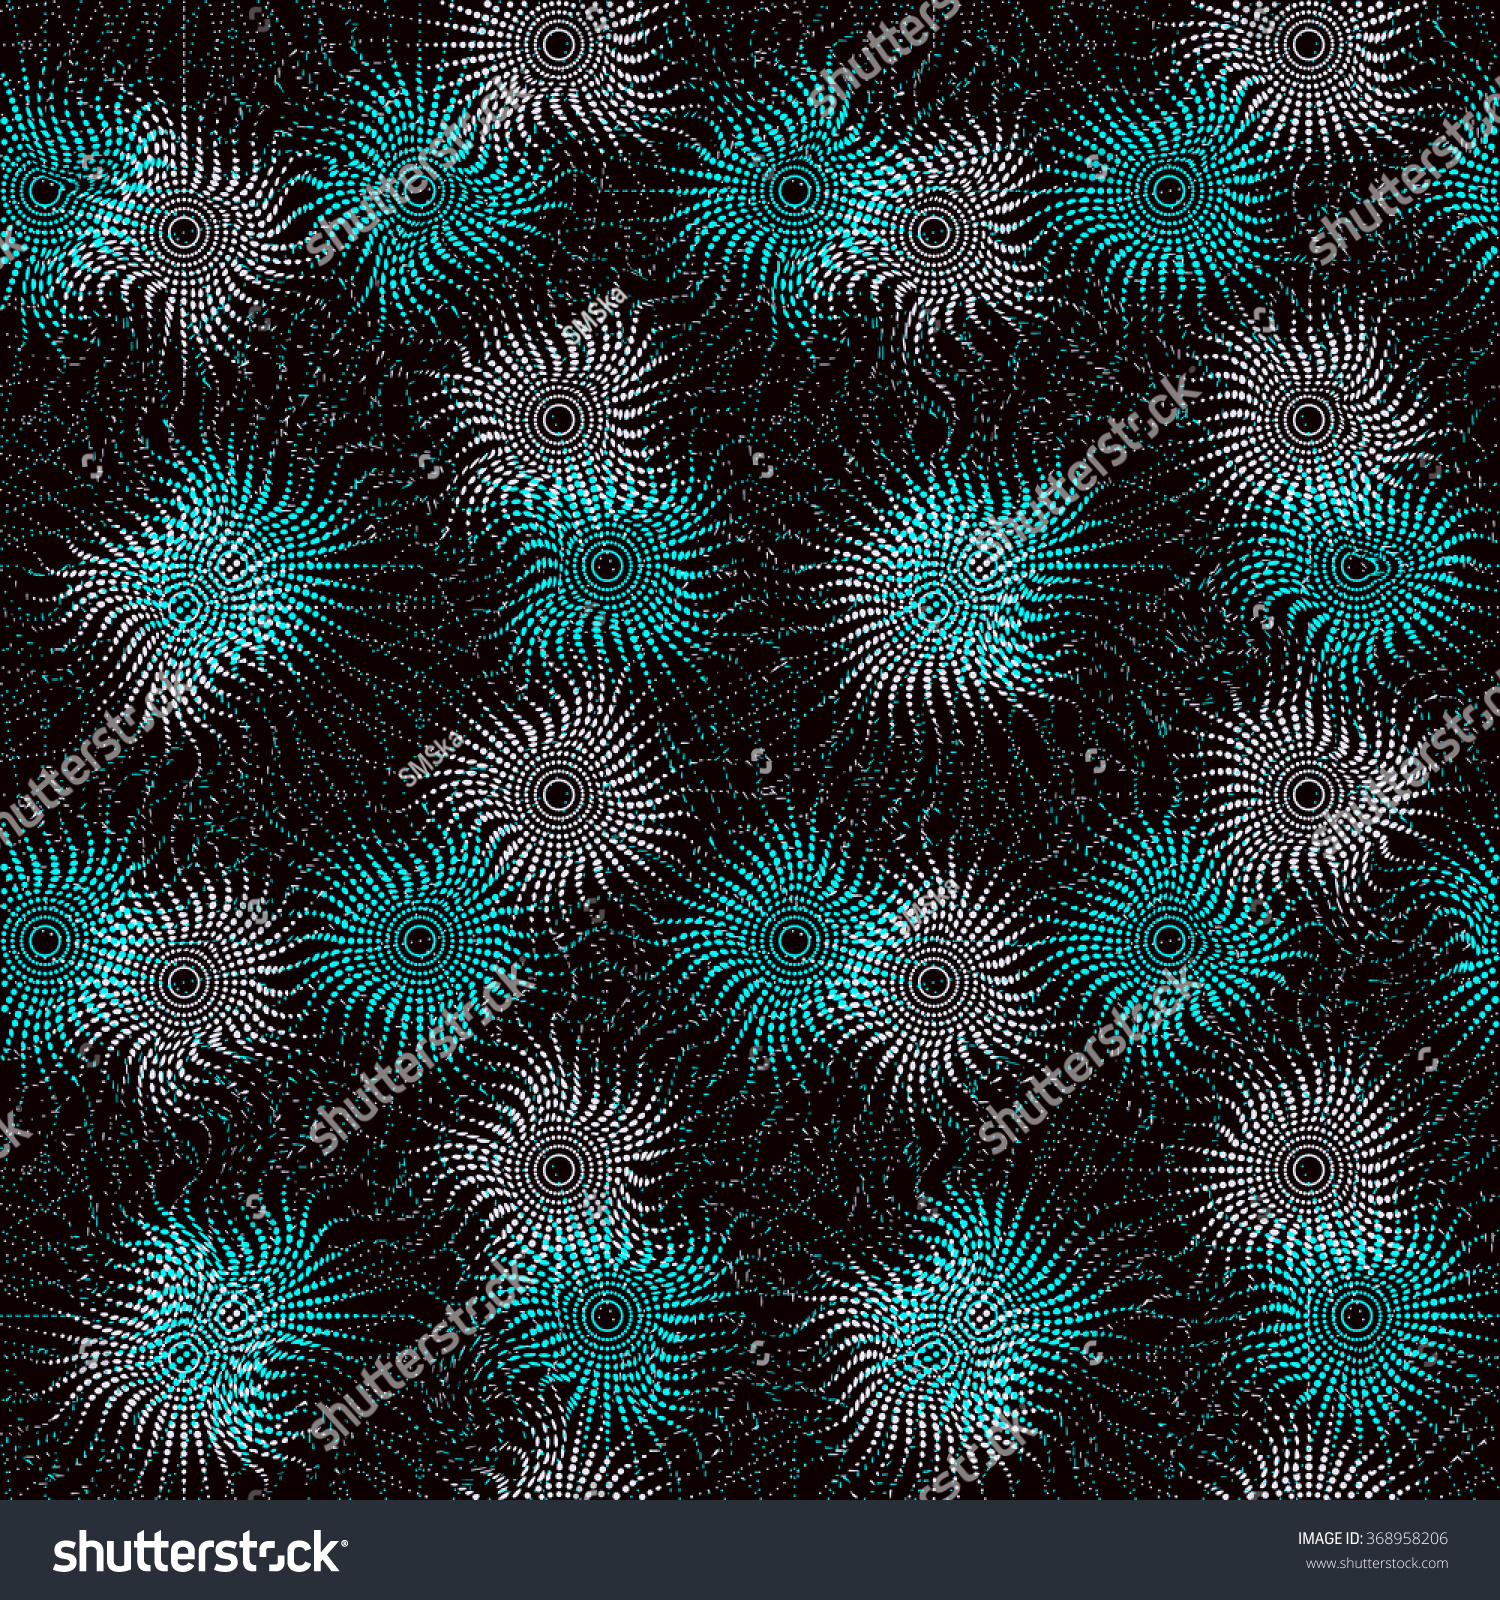 SVG of Vector seamless background with the effect of fireworks-style glitch svg